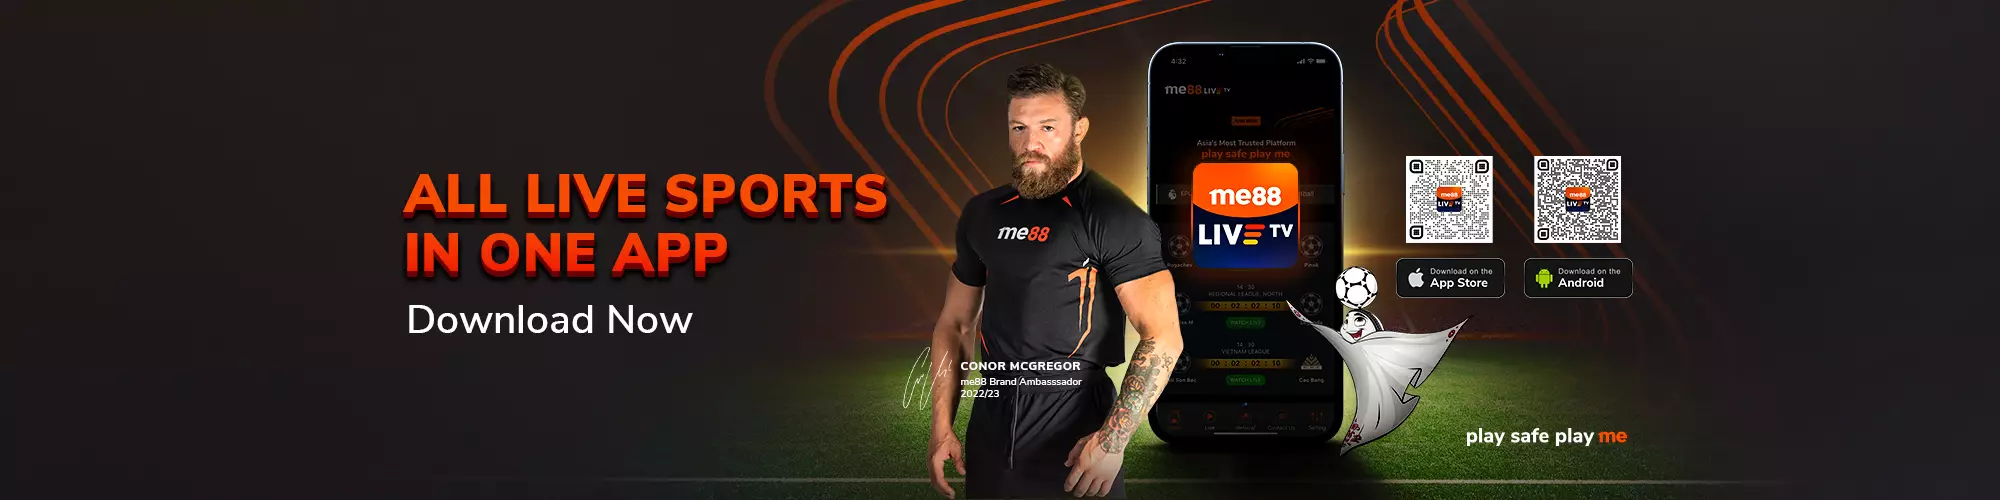 me88-all-live-sports-in-one-app